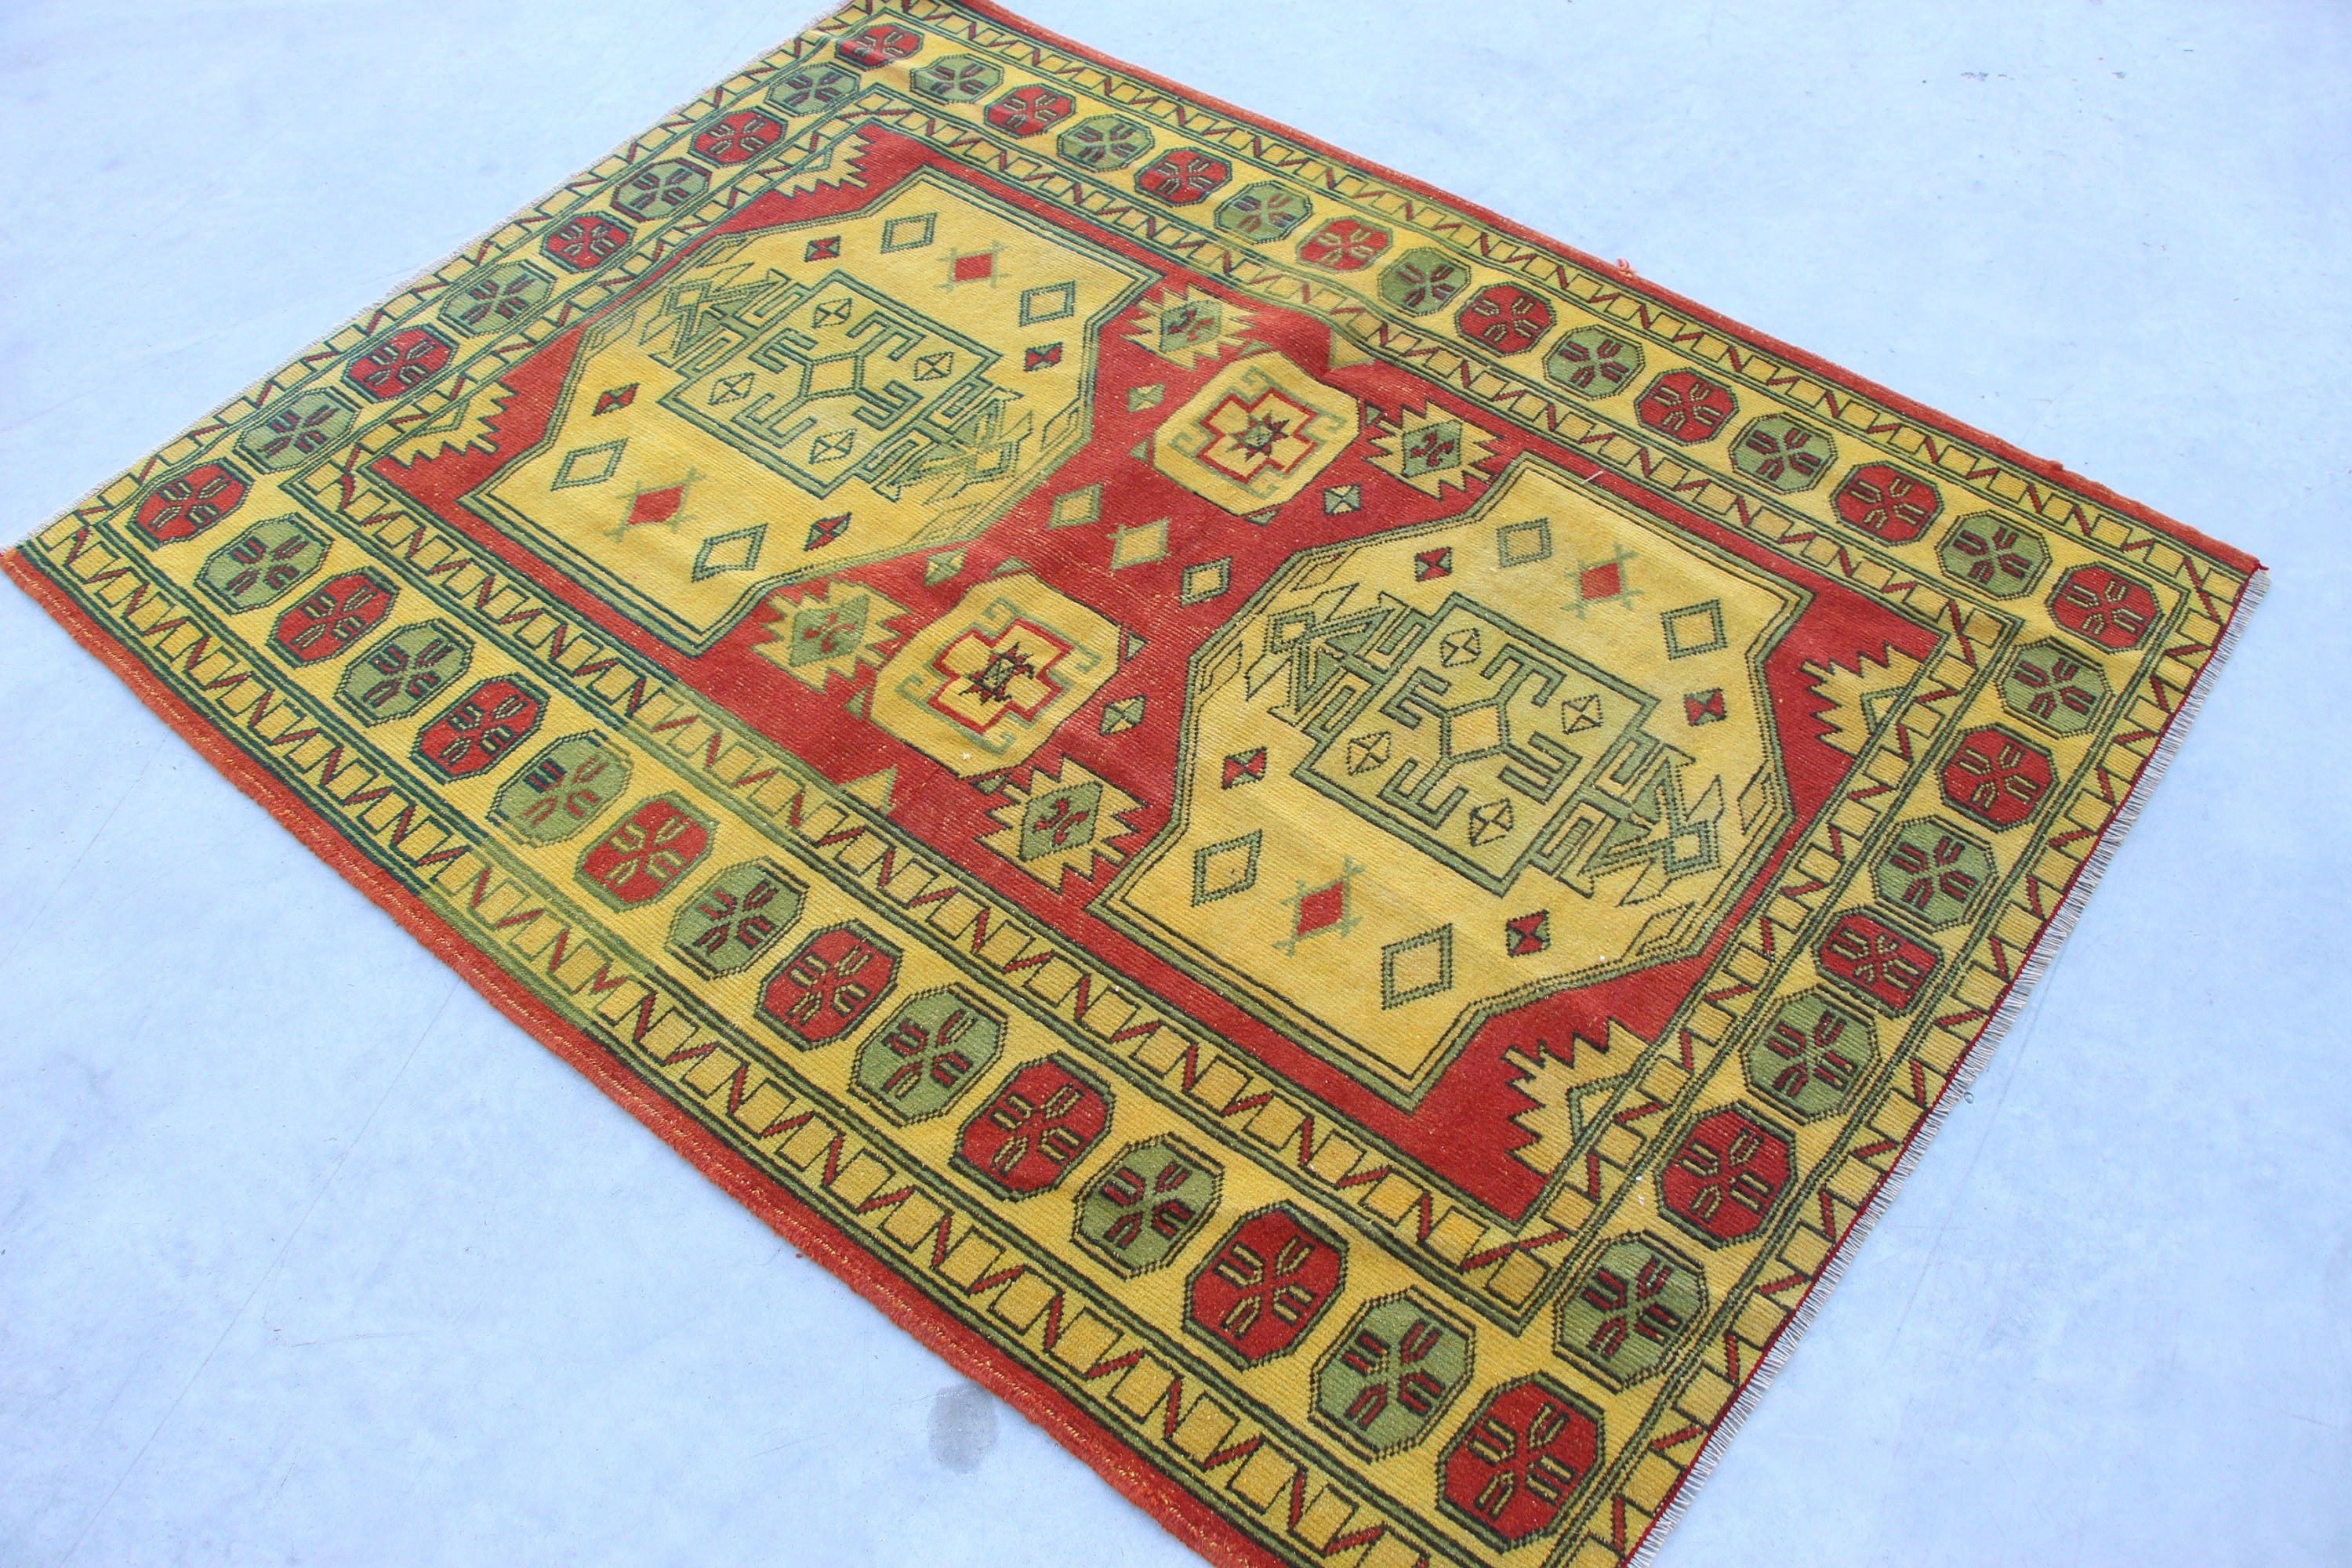 Kitchen Rug, Floor Rugs, Turkish Rug, Pastel Rug, 4x5.3 ft Accent Rug, Yellow Bedroom Rugs, Vintage Rug, Entry Rug, Rugs for Entry, Art Rug